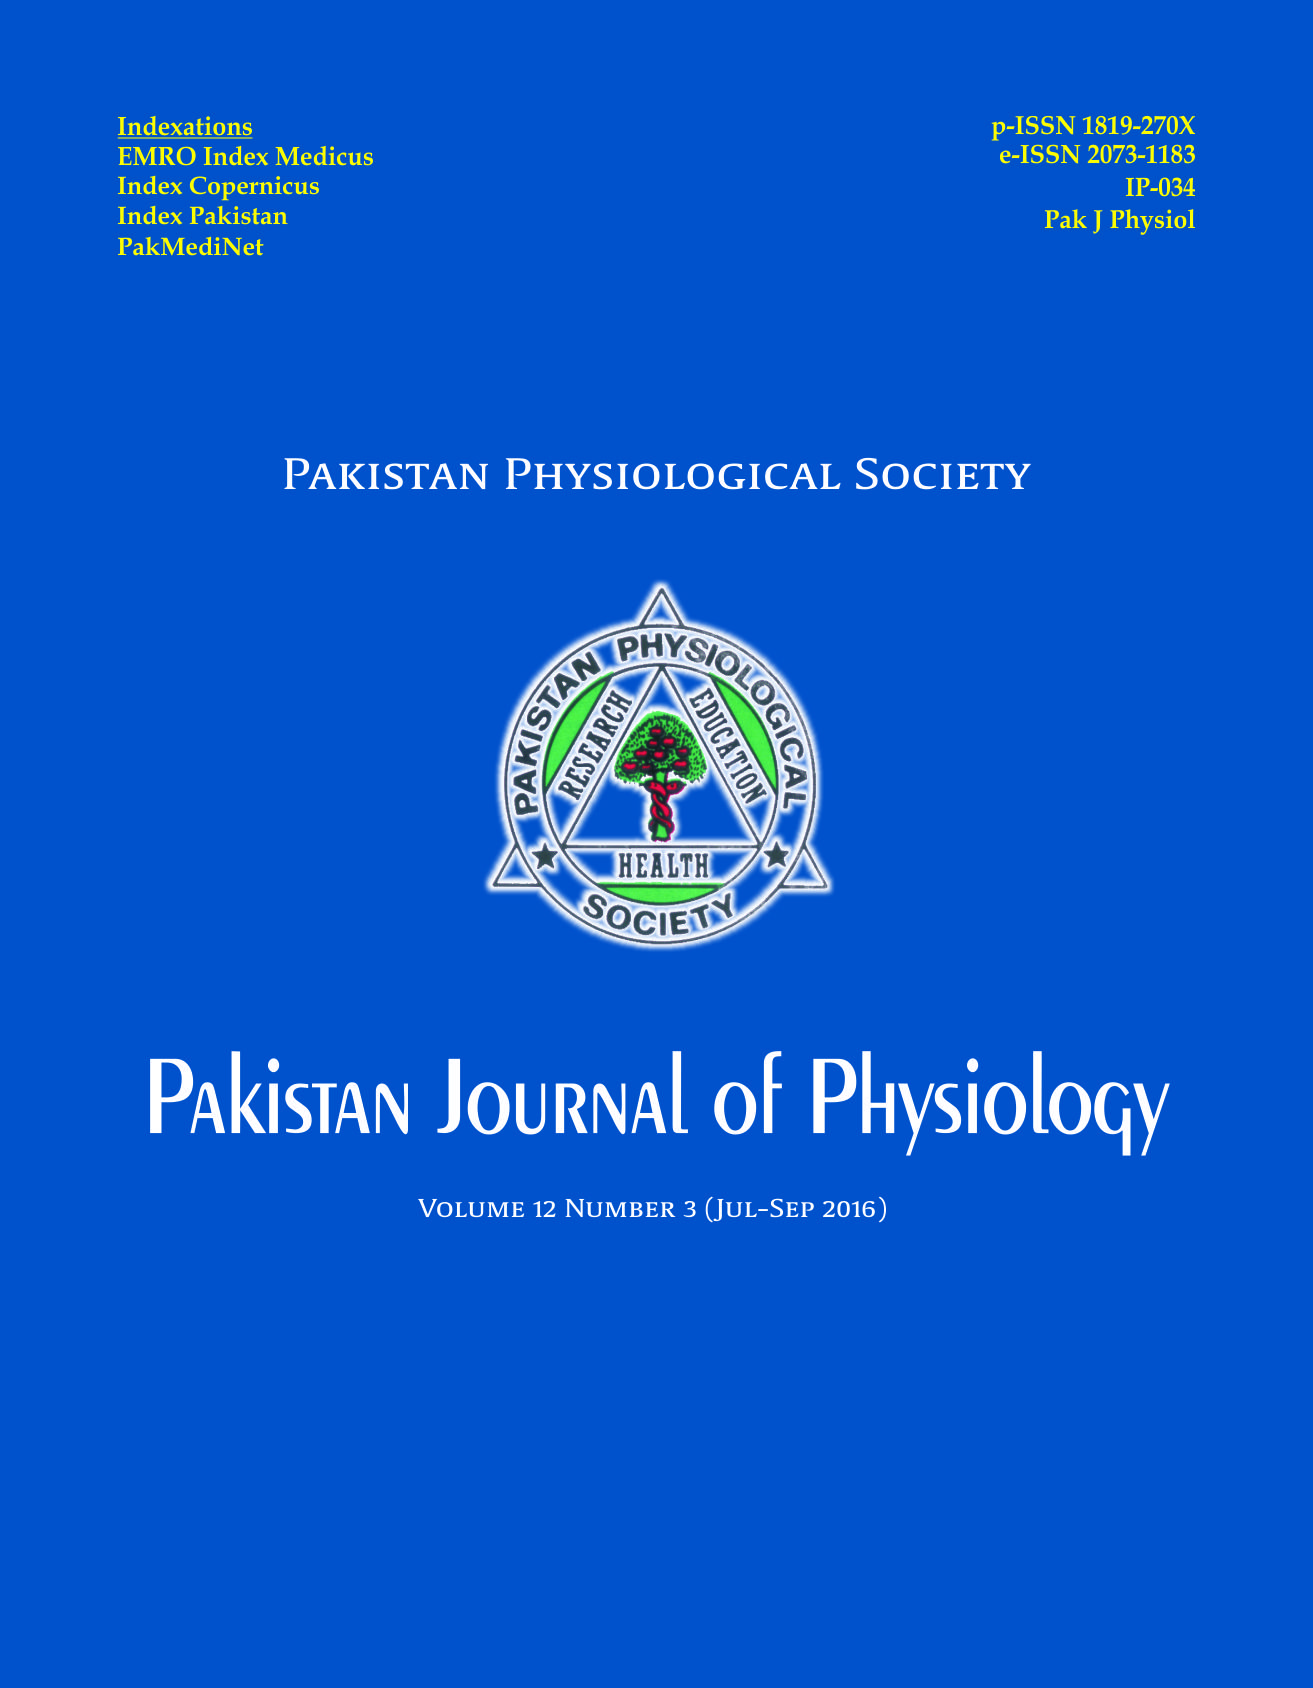 					View Vol. 12 No. 3 (2016): Pakistan Journal of Physiology
				